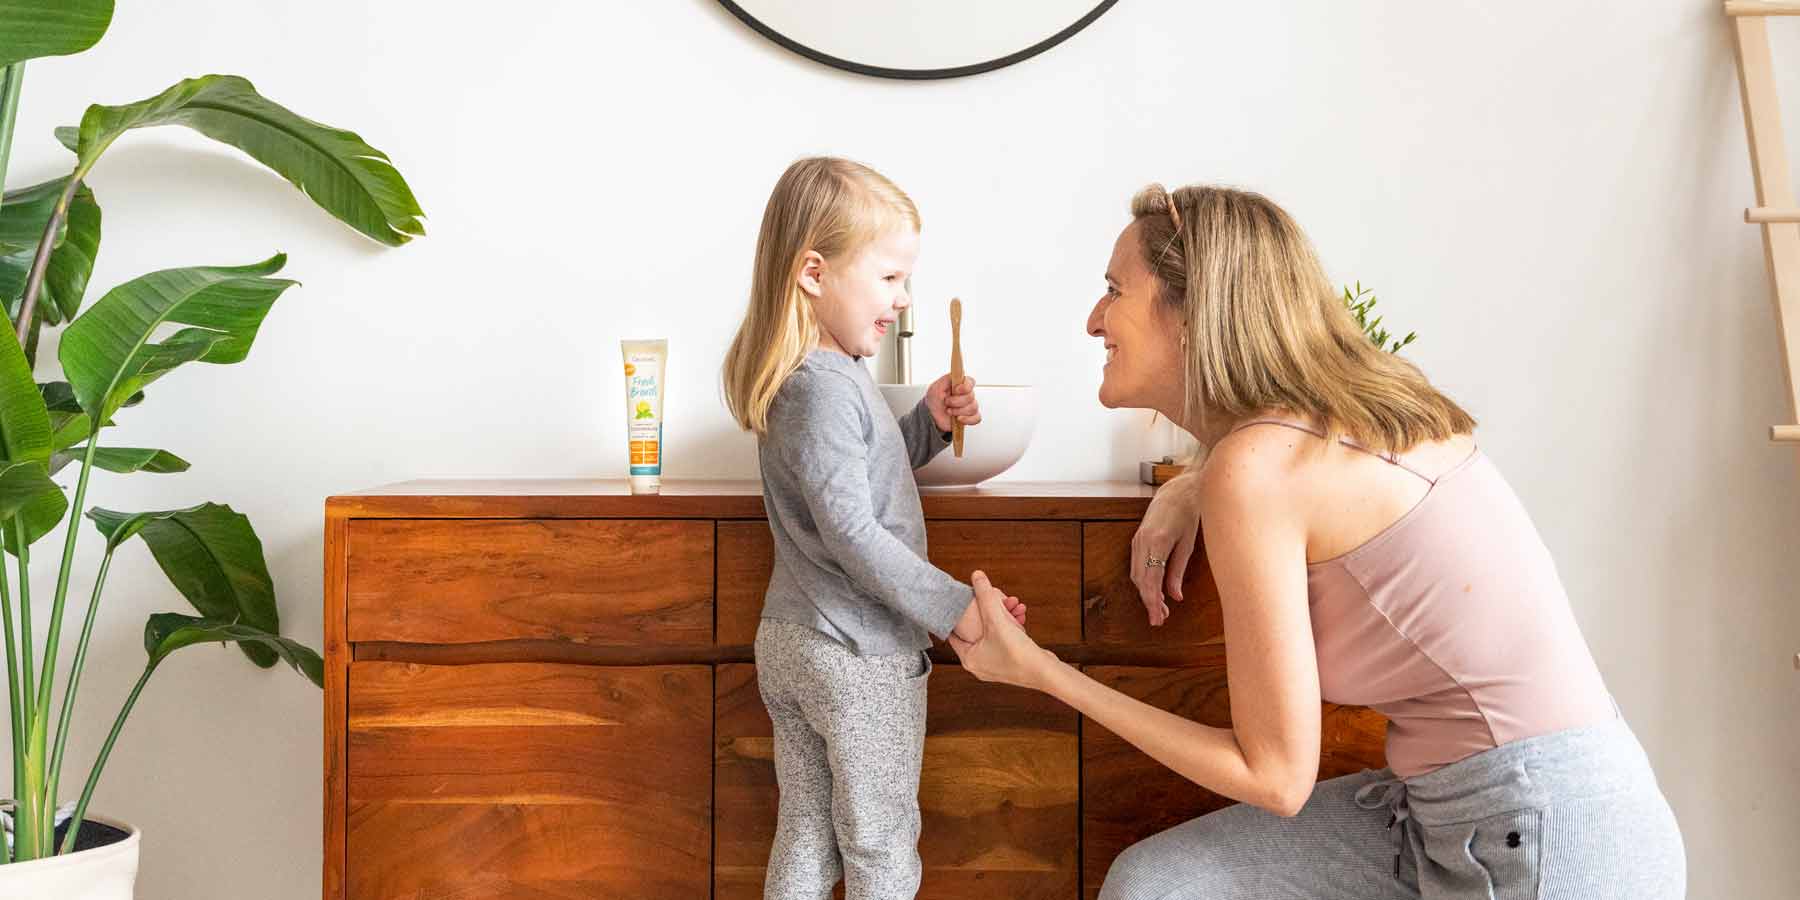 woman holding her daughter's hand smiling while they smile at each other during their morning dental routine